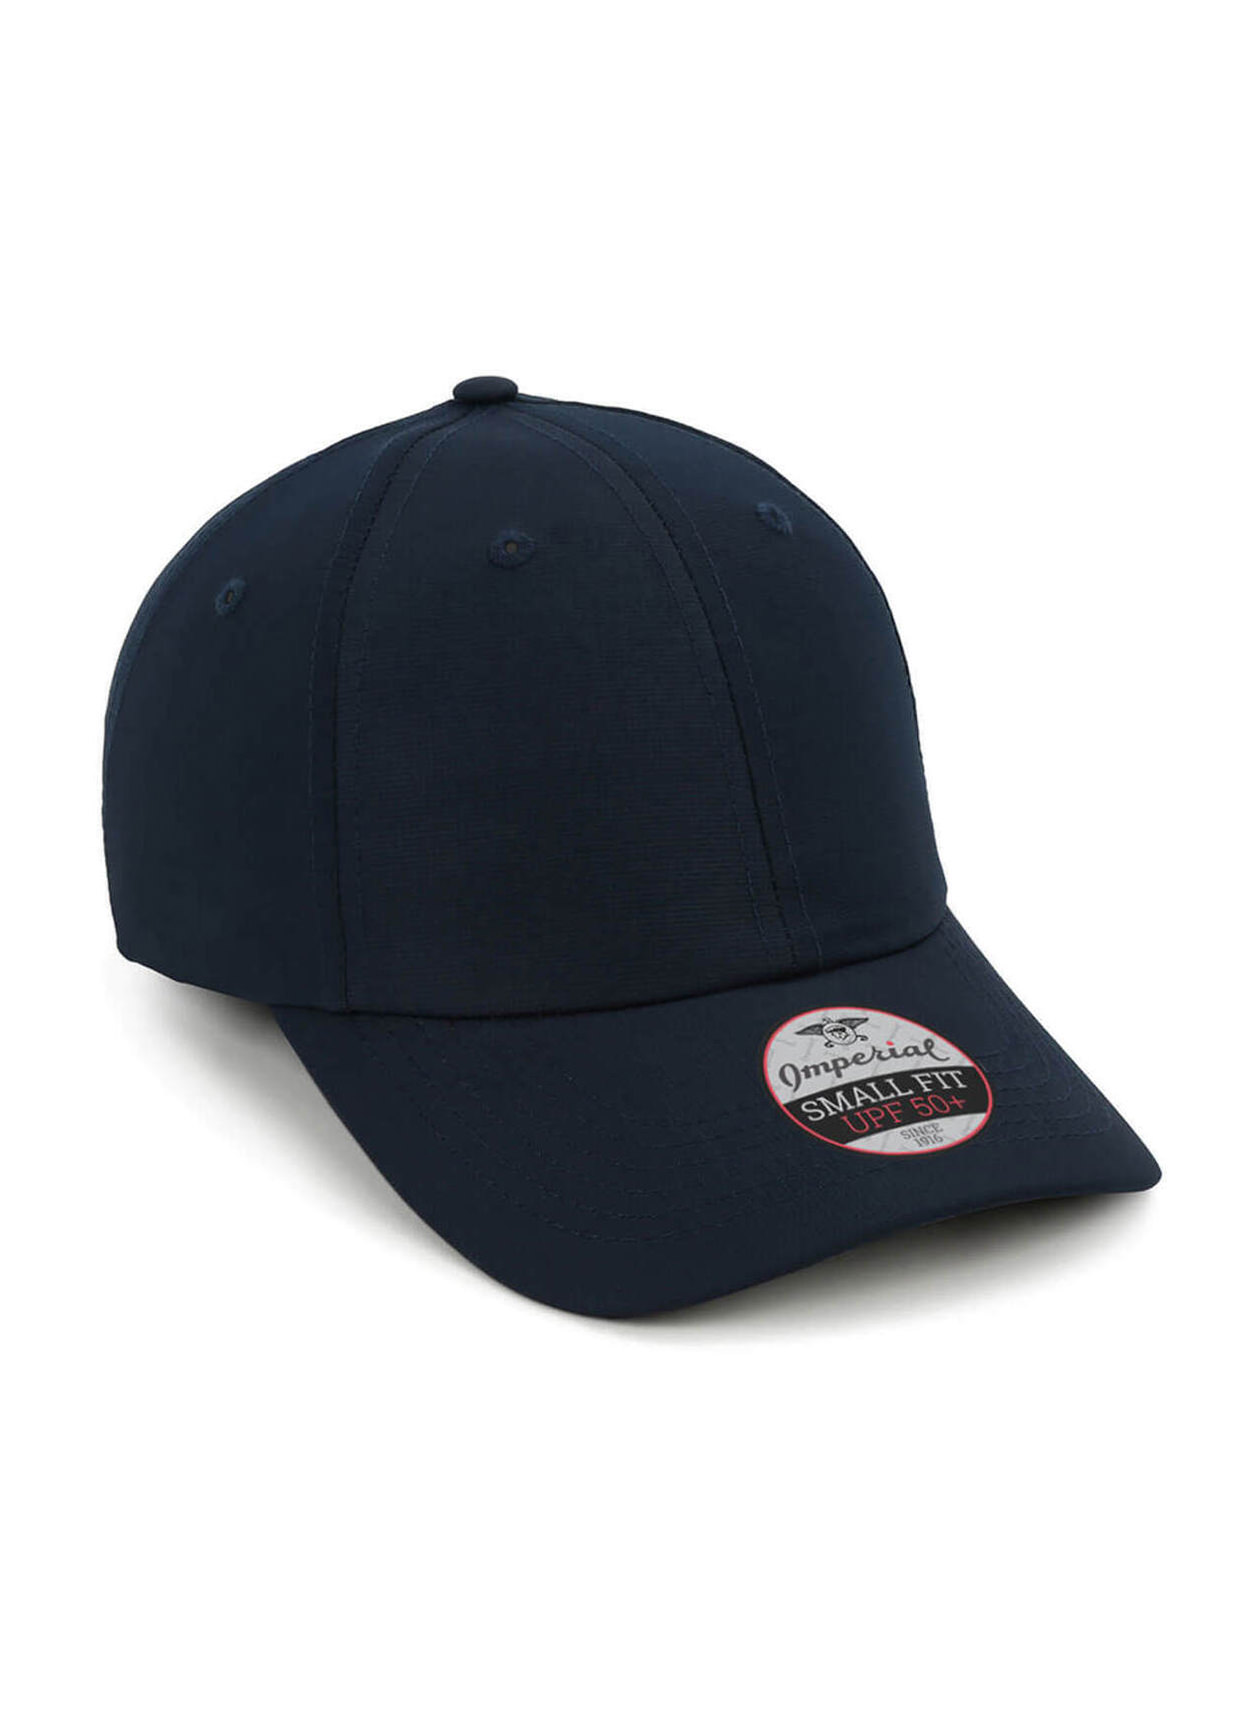 Imperial True Navy Original Small Fit Performance Hat